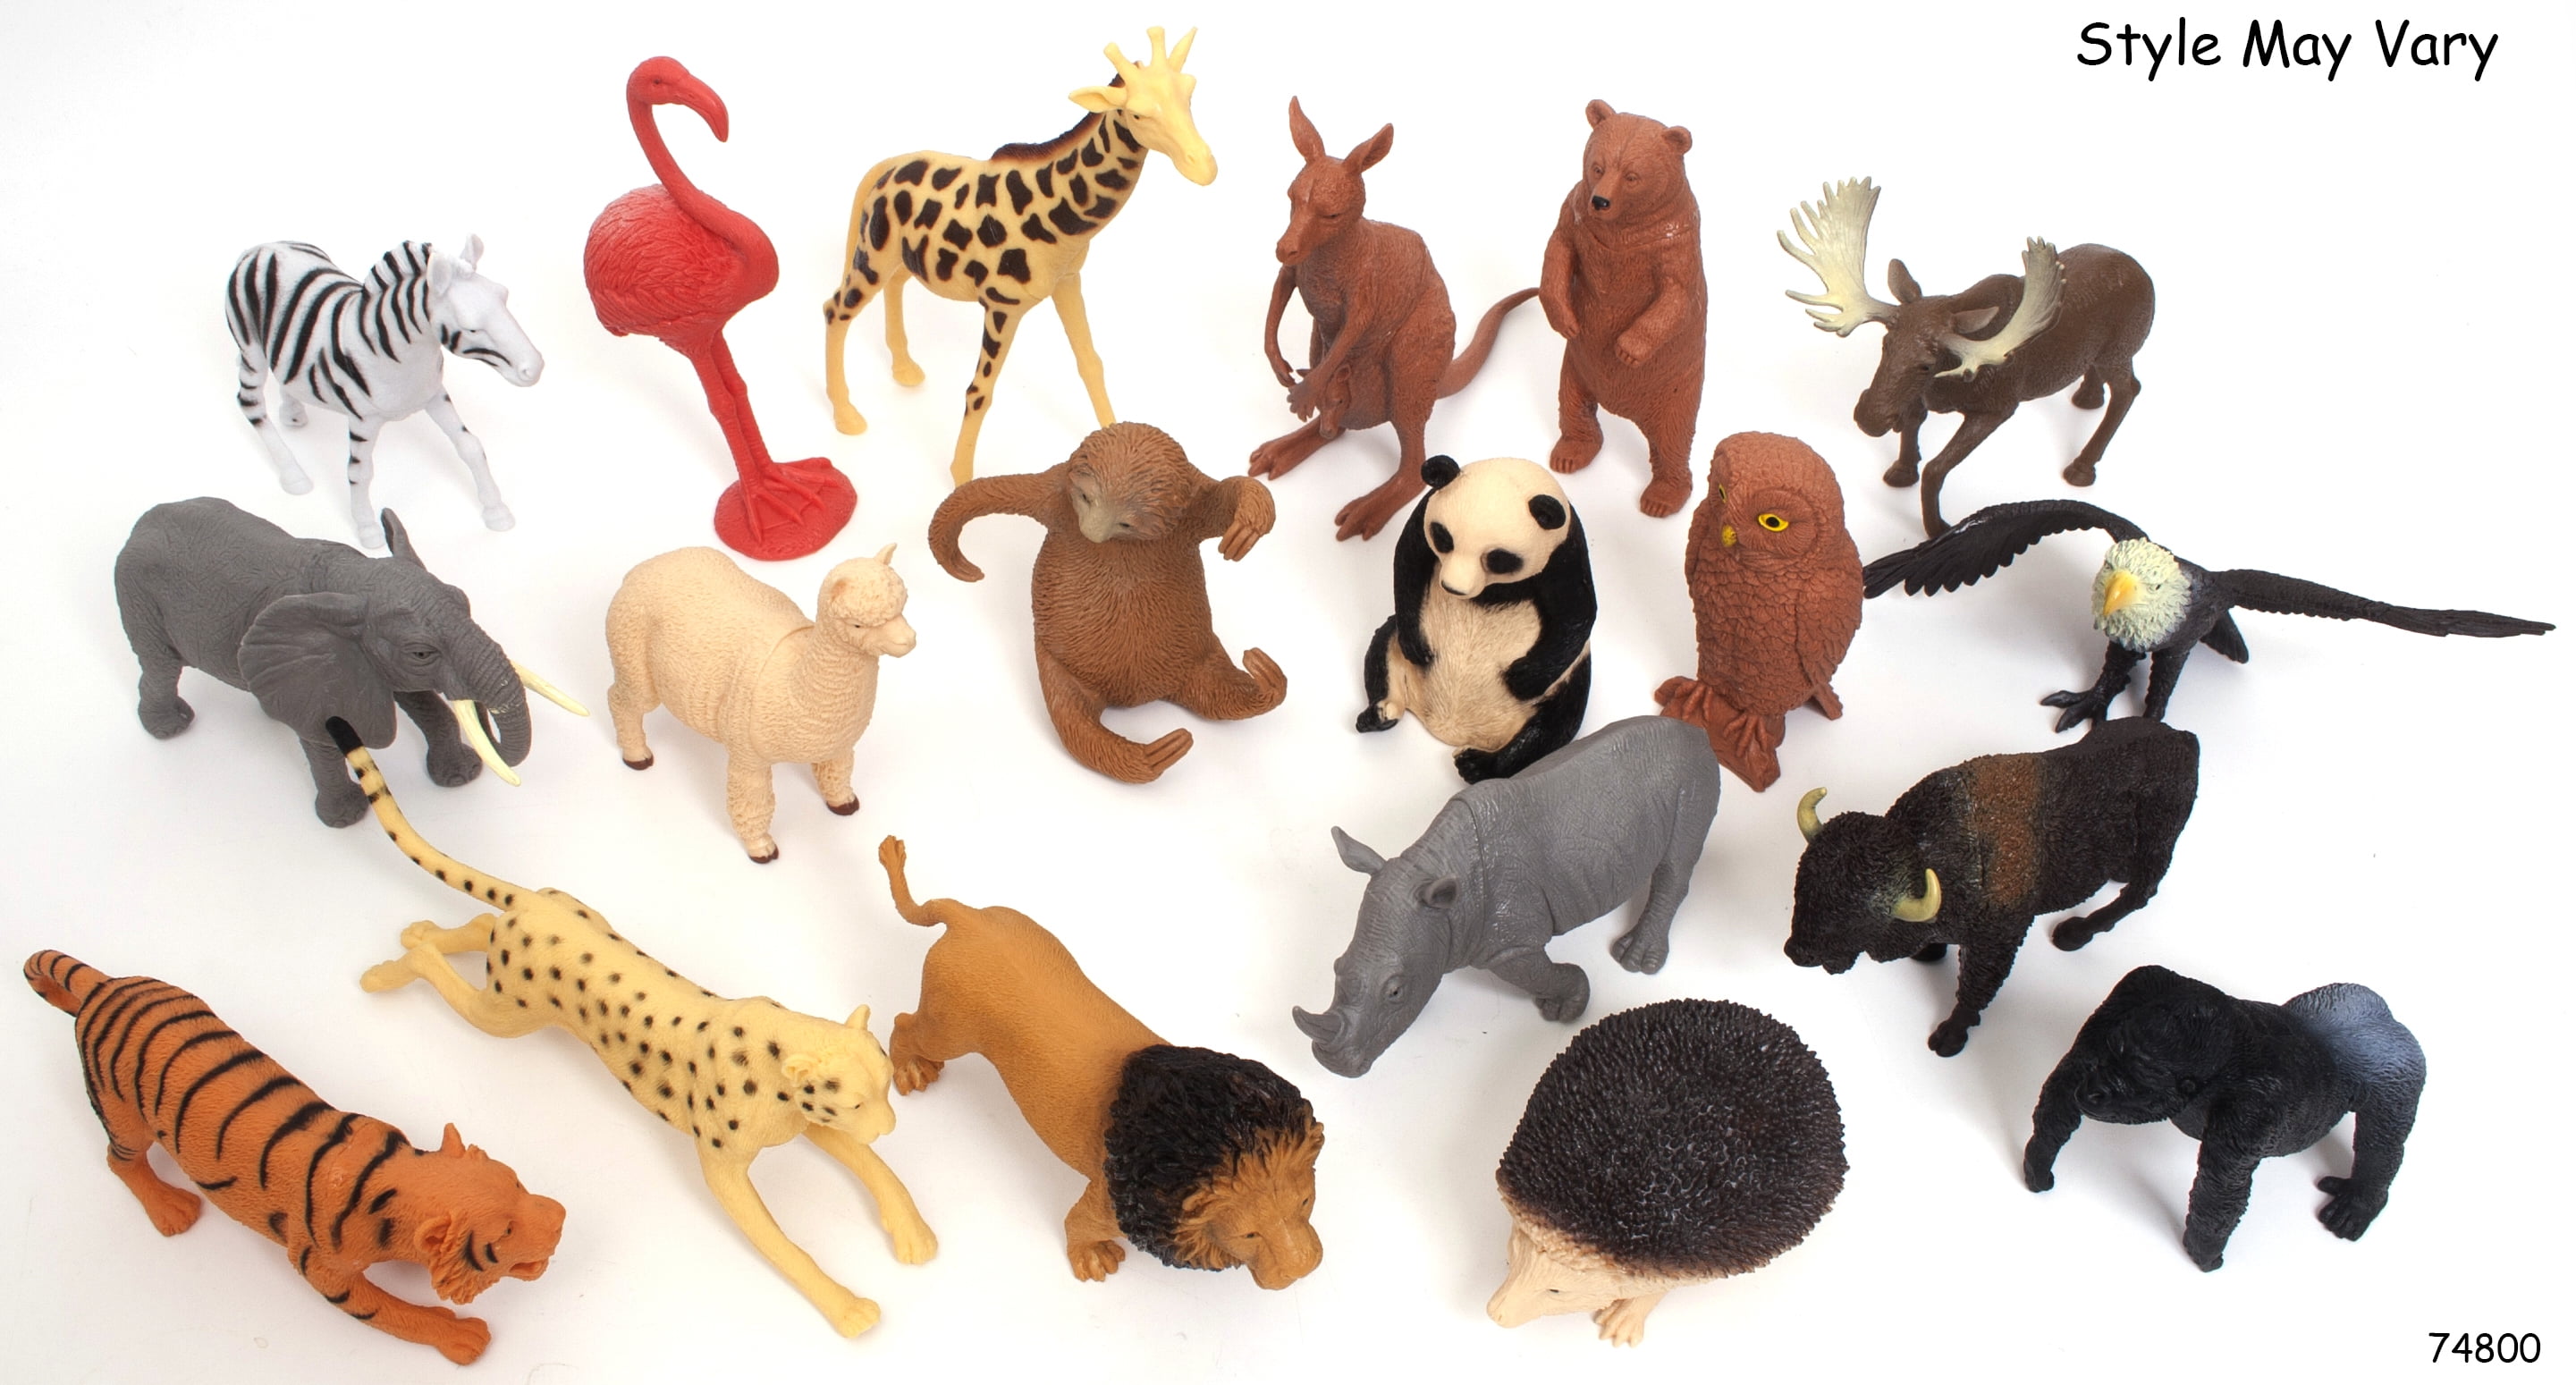 Details about   Animal Figurine Kids Toys Gifts For Kids Figure Mini Children Cute Toy Model SH 